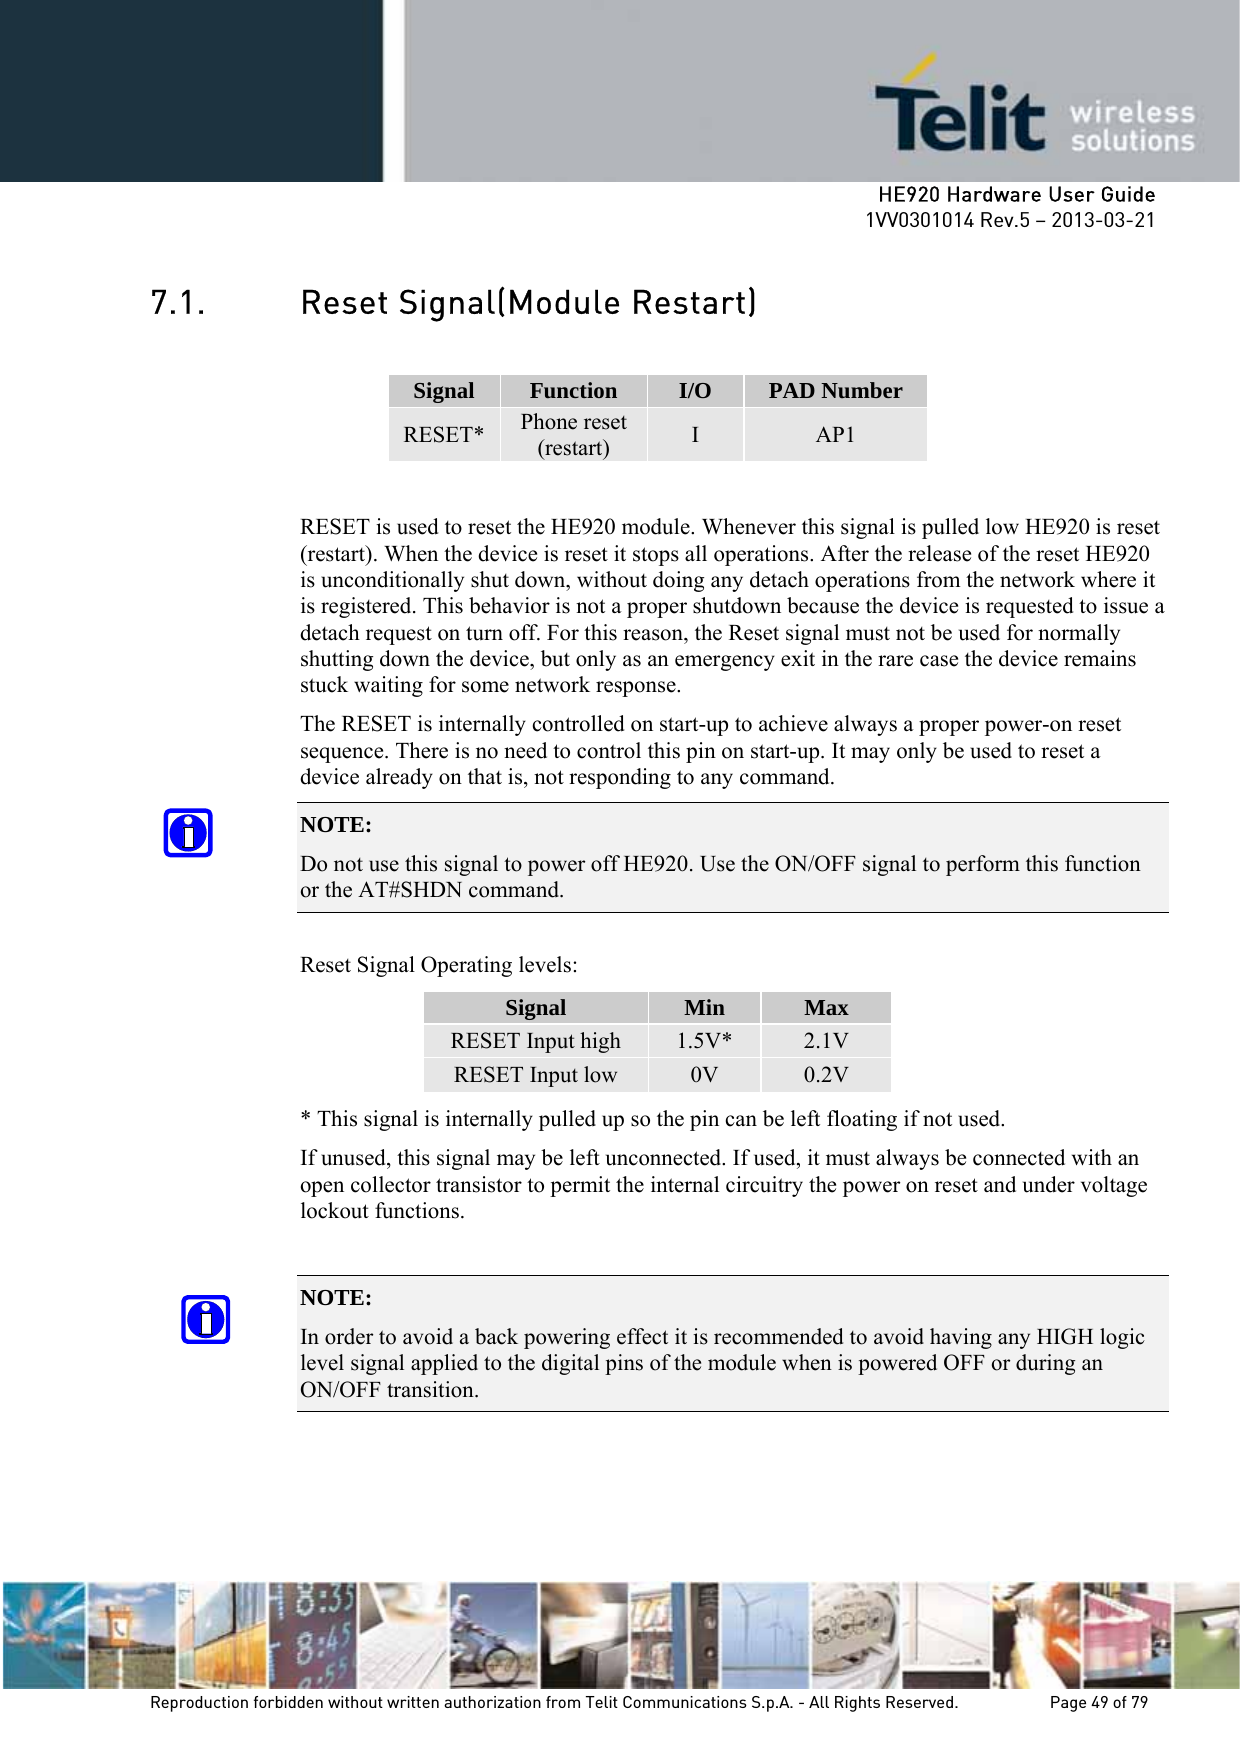     HE920 Hardware User Guide 1VV0301014 Rev.5 – 2013-03-21 Reproduction forbidden without written authorization from Telit Communications S.p.A. - All Rights Reserved.    Page 49 of 79  7.1. Reset Signal(Module Restart)  Signal  Function  I/O  PAD Number RESET*  Phone reset (restart)  I  AP1  RESET is used to reset the HE920 module. Whenever this signal is pulled low HE920 is reset (restart). When the device is reset it stops all operations. After the release of the reset HE920 is unconditionally shut down, without doing any detach operations from the network where it is registered. This behavior is not a proper shutdown because the device is requested to issue a detach request on turn off. For this reason, the Reset signal must not be used for normally shutting down the device, but only as an emergency exit in the rare case the device remains stuck waiting for some network response. The RESET is internally controlled on start-up to achieve always a proper power-on reset sequence. There is no need to control this pin on start-up. It may only be used to reset a device already on that is, not responding to any command. NOTE:  Do not use this signal to power off HE920. Use the ON/OFF signal to perform this function or the AT#SHDN command.  Reset Signal Operating levels: Signal  Min  Max RESET Input high  1.5V*  2.1V RESET Input low  0V  0.2V * This signal is internally pulled up so the pin can be left floating if not used. If unused, this signal may be left unconnected. If used, it must always be connected with an open collector transistor to permit the internal circuitry the power on reset and under voltage lockout functions.  NOTE:  In order to avoid a back powering effect it is recommended to avoid having any HIGH logic level signal applied to the digital pins of the module when is powered OFF or during an ON/OFF transition.  